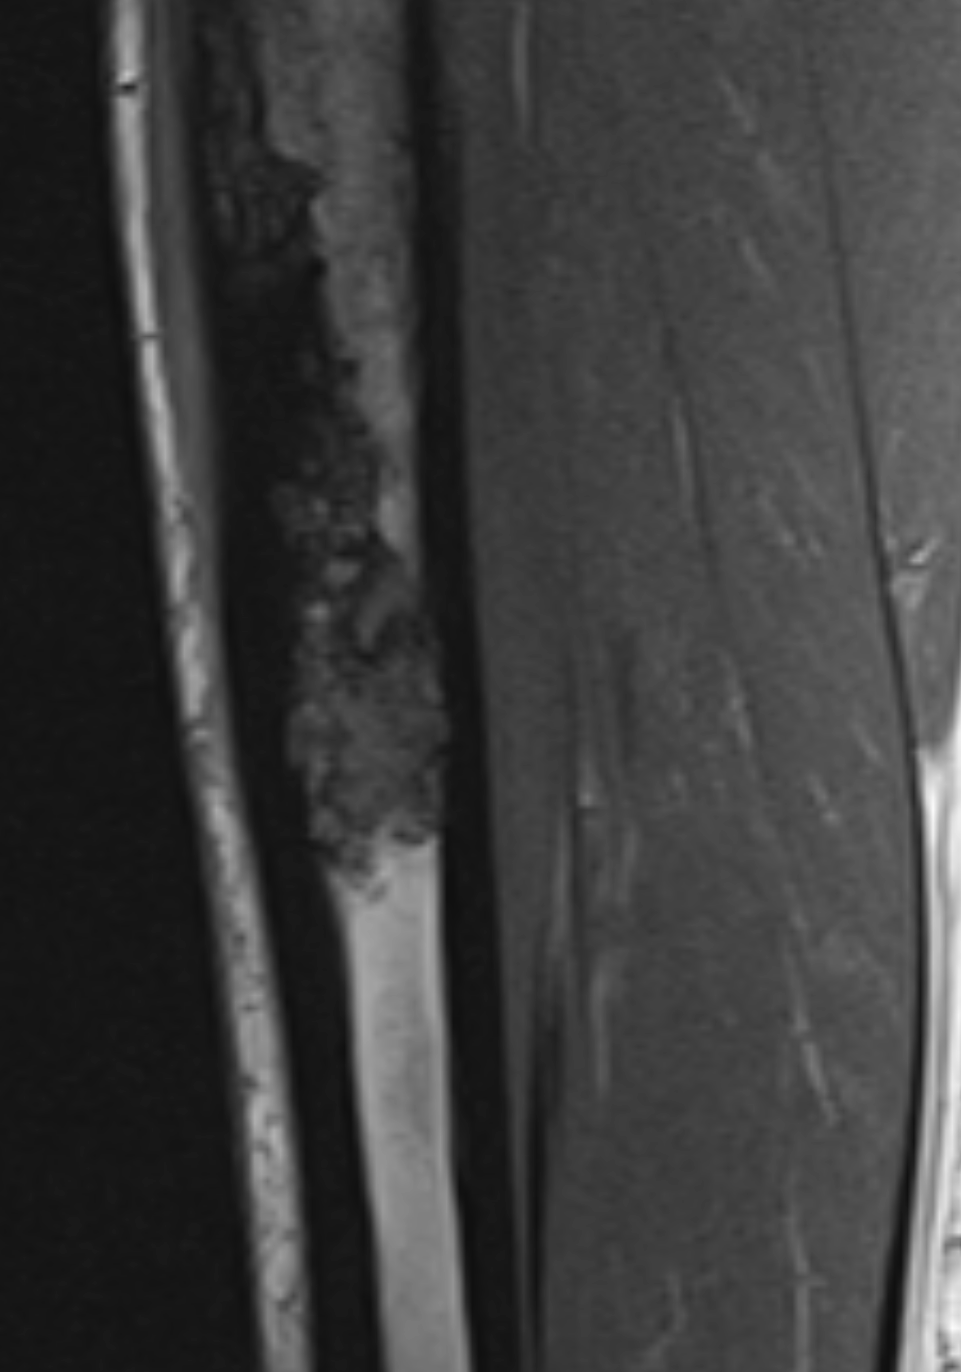 T1 low signal intramedullary lesion within the anterior tibia representative of a biopsy proven adamantinoma.